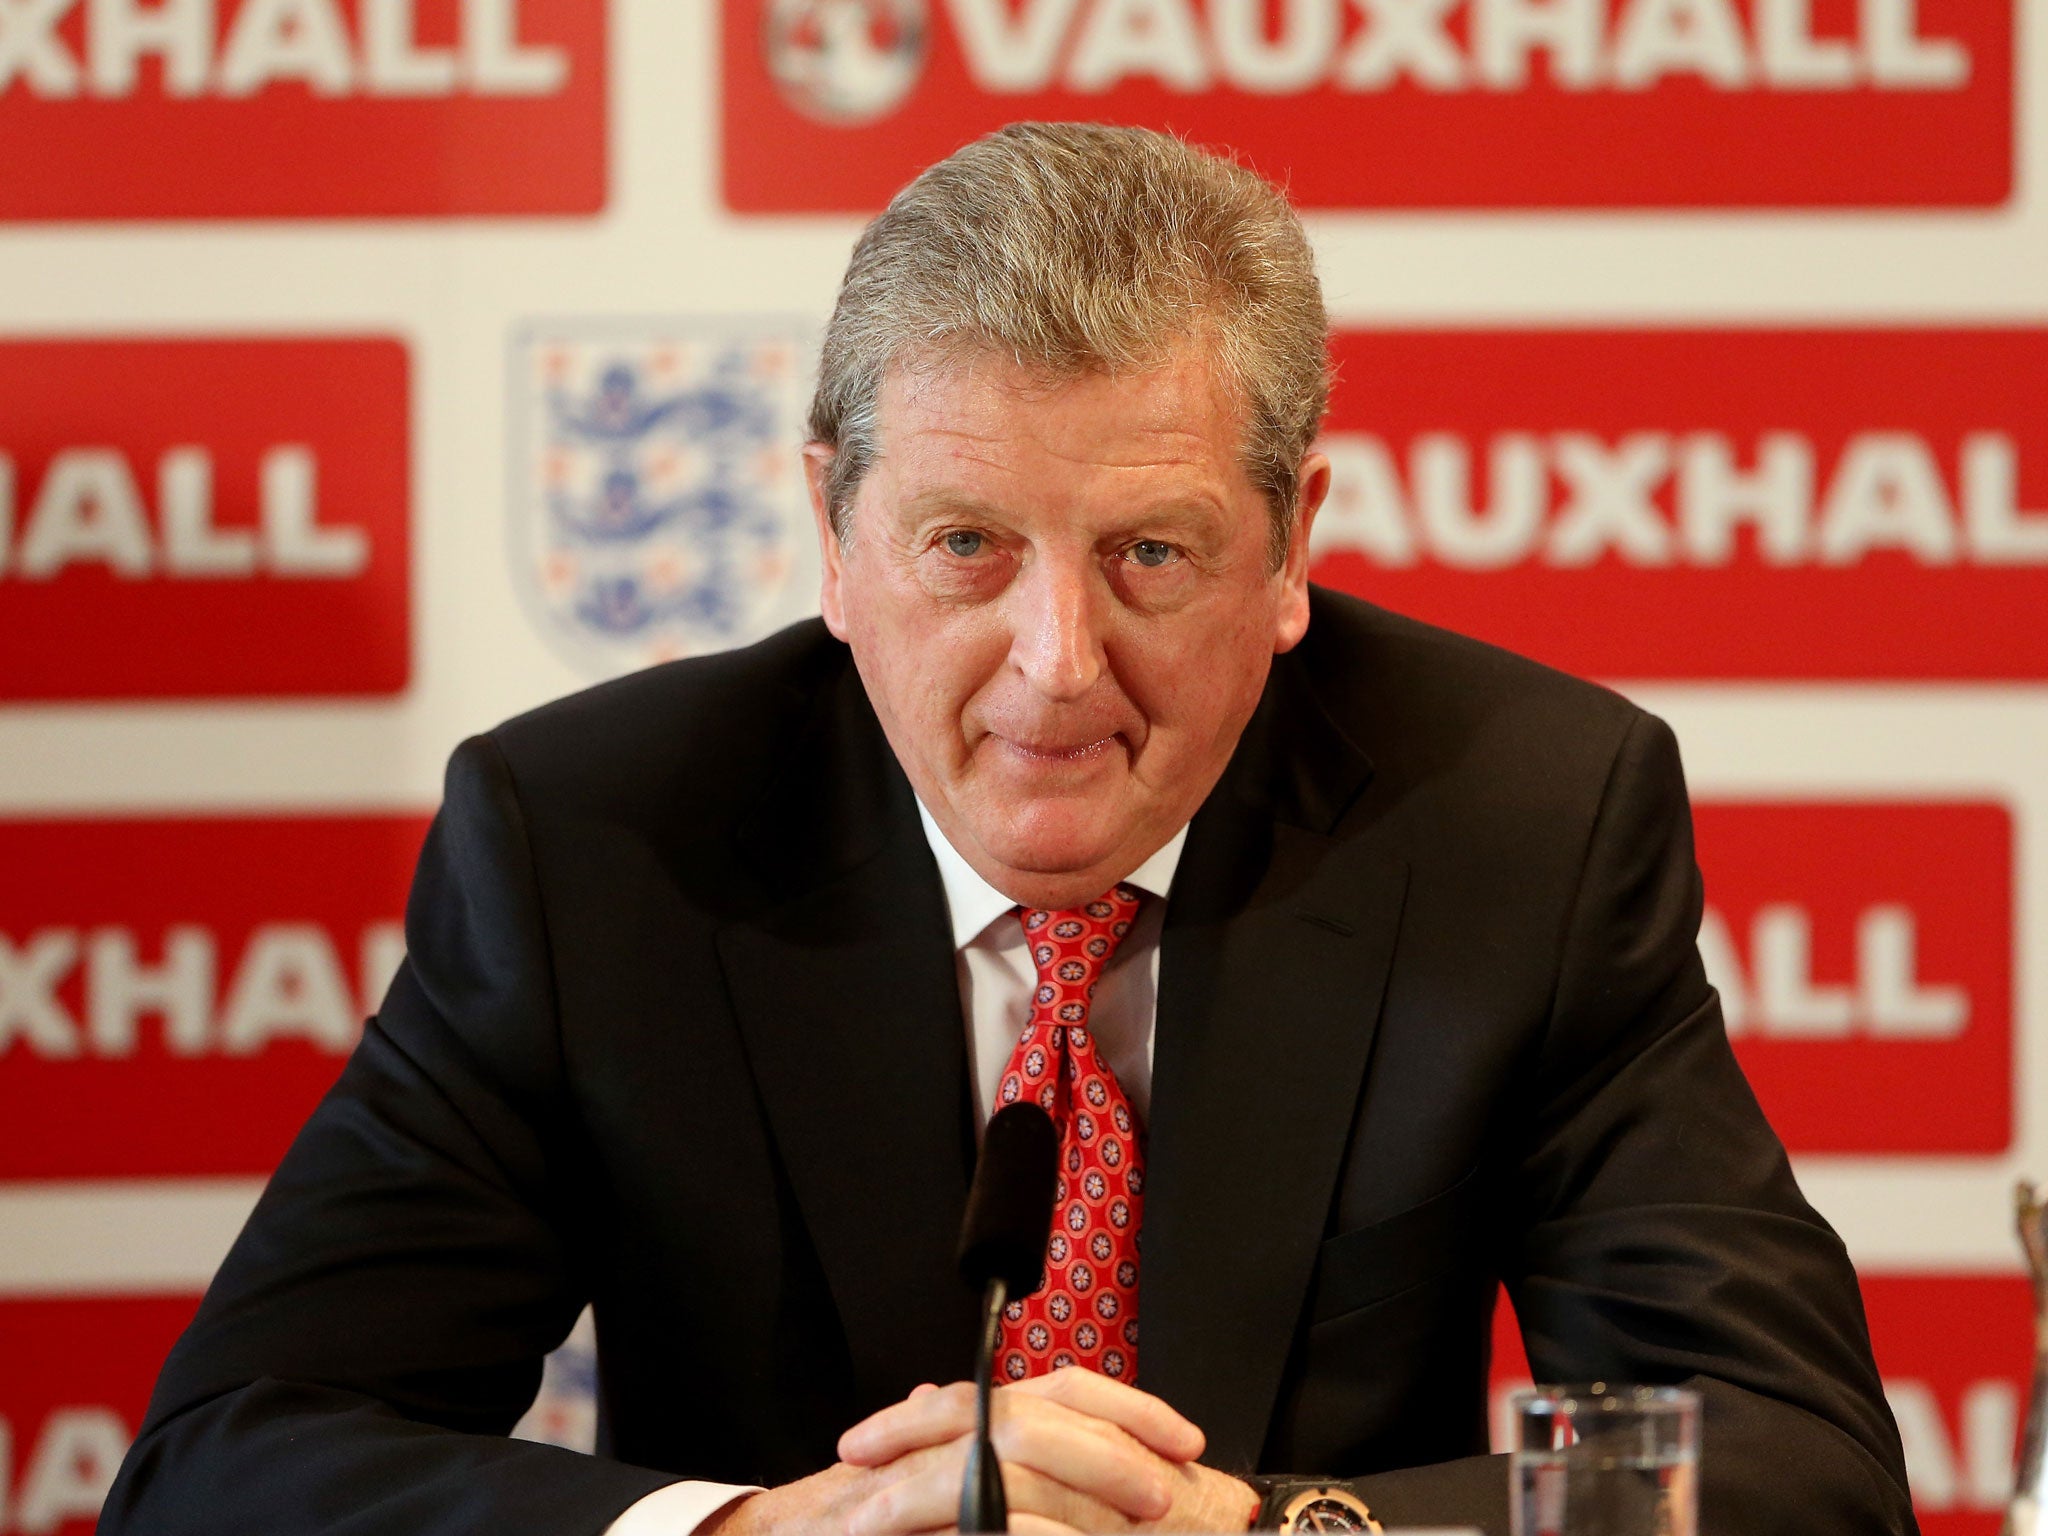 Roy Hodgson's England squad joins the other 31 teams at this year's World Cup